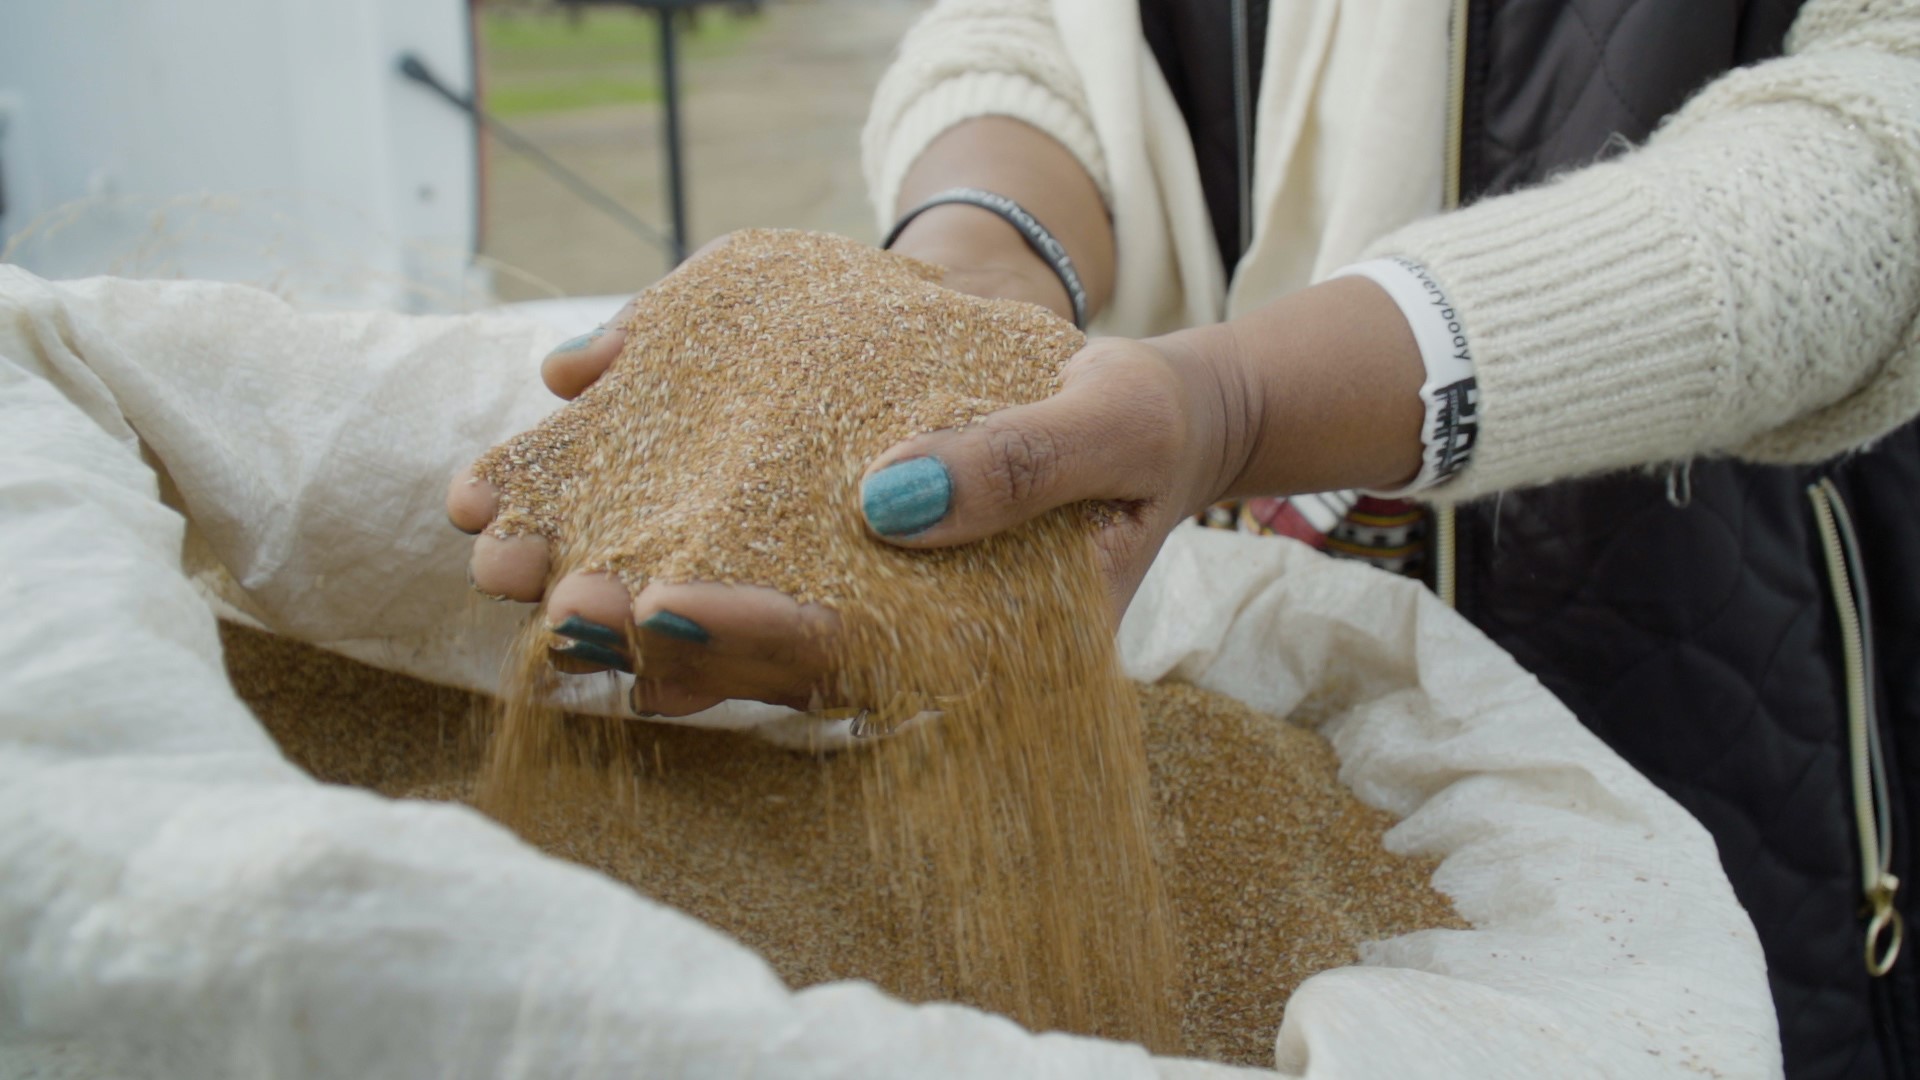 The owner of Queen Sheba in Sacramento uses the Ethiopian grain teff in her cooking. It’s a gluten-free gain, high in iron and fiber.